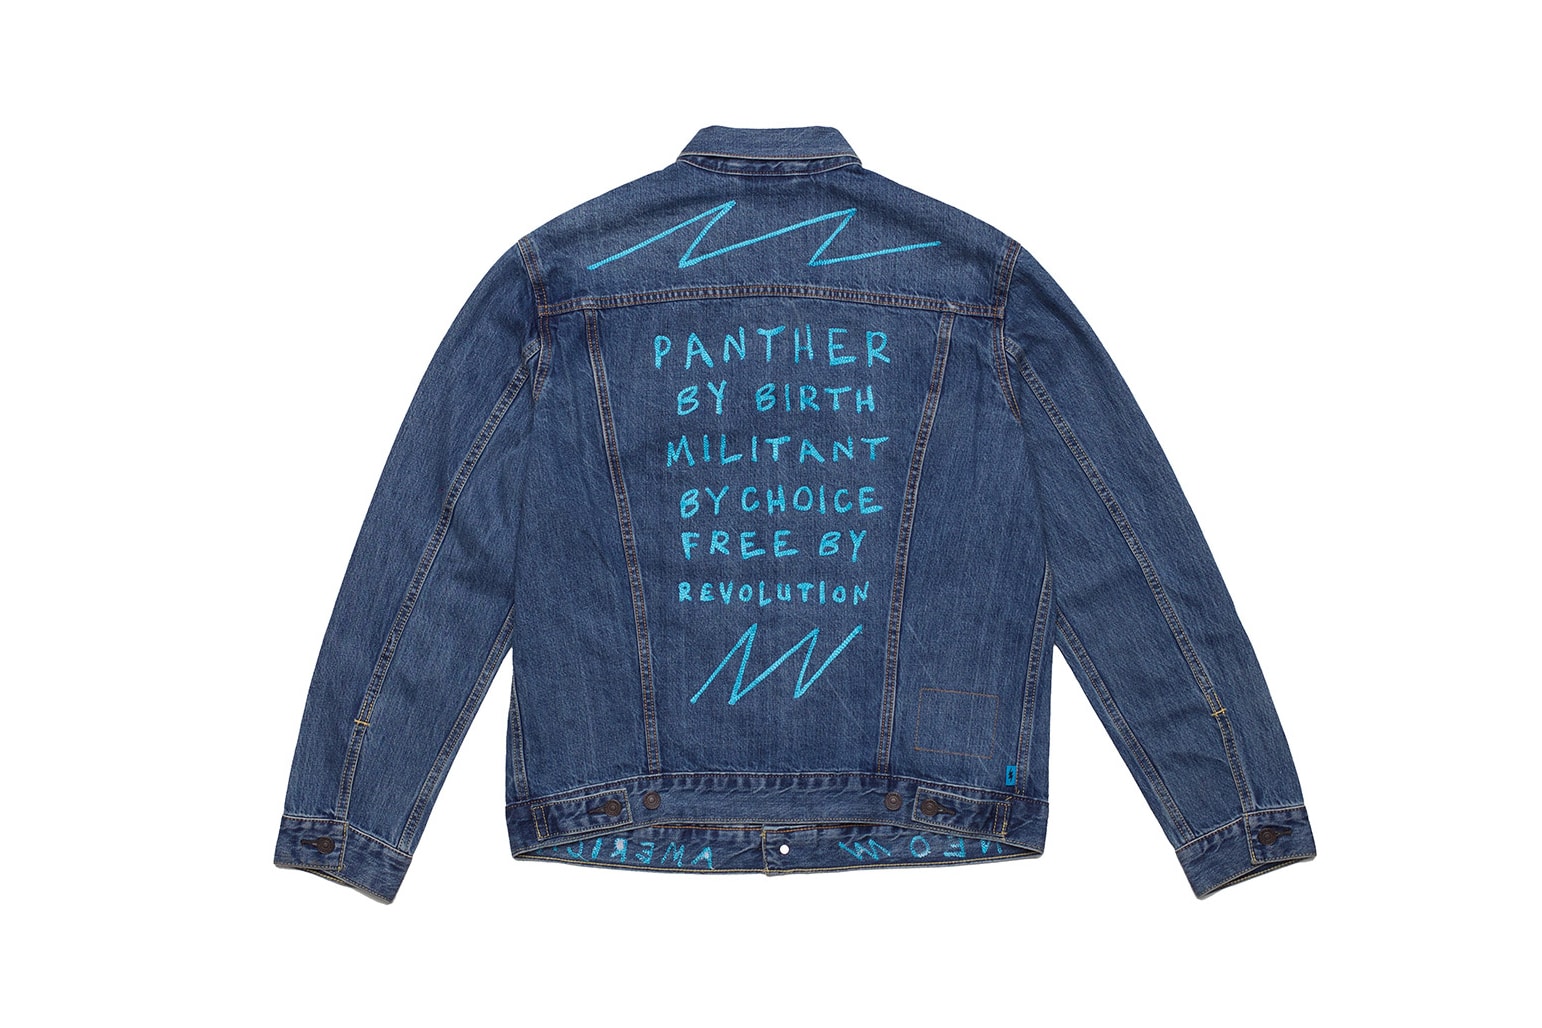 Rare Panther Levi's Trucker Jacket Denim Clothing Outerwear Fashion Apparel